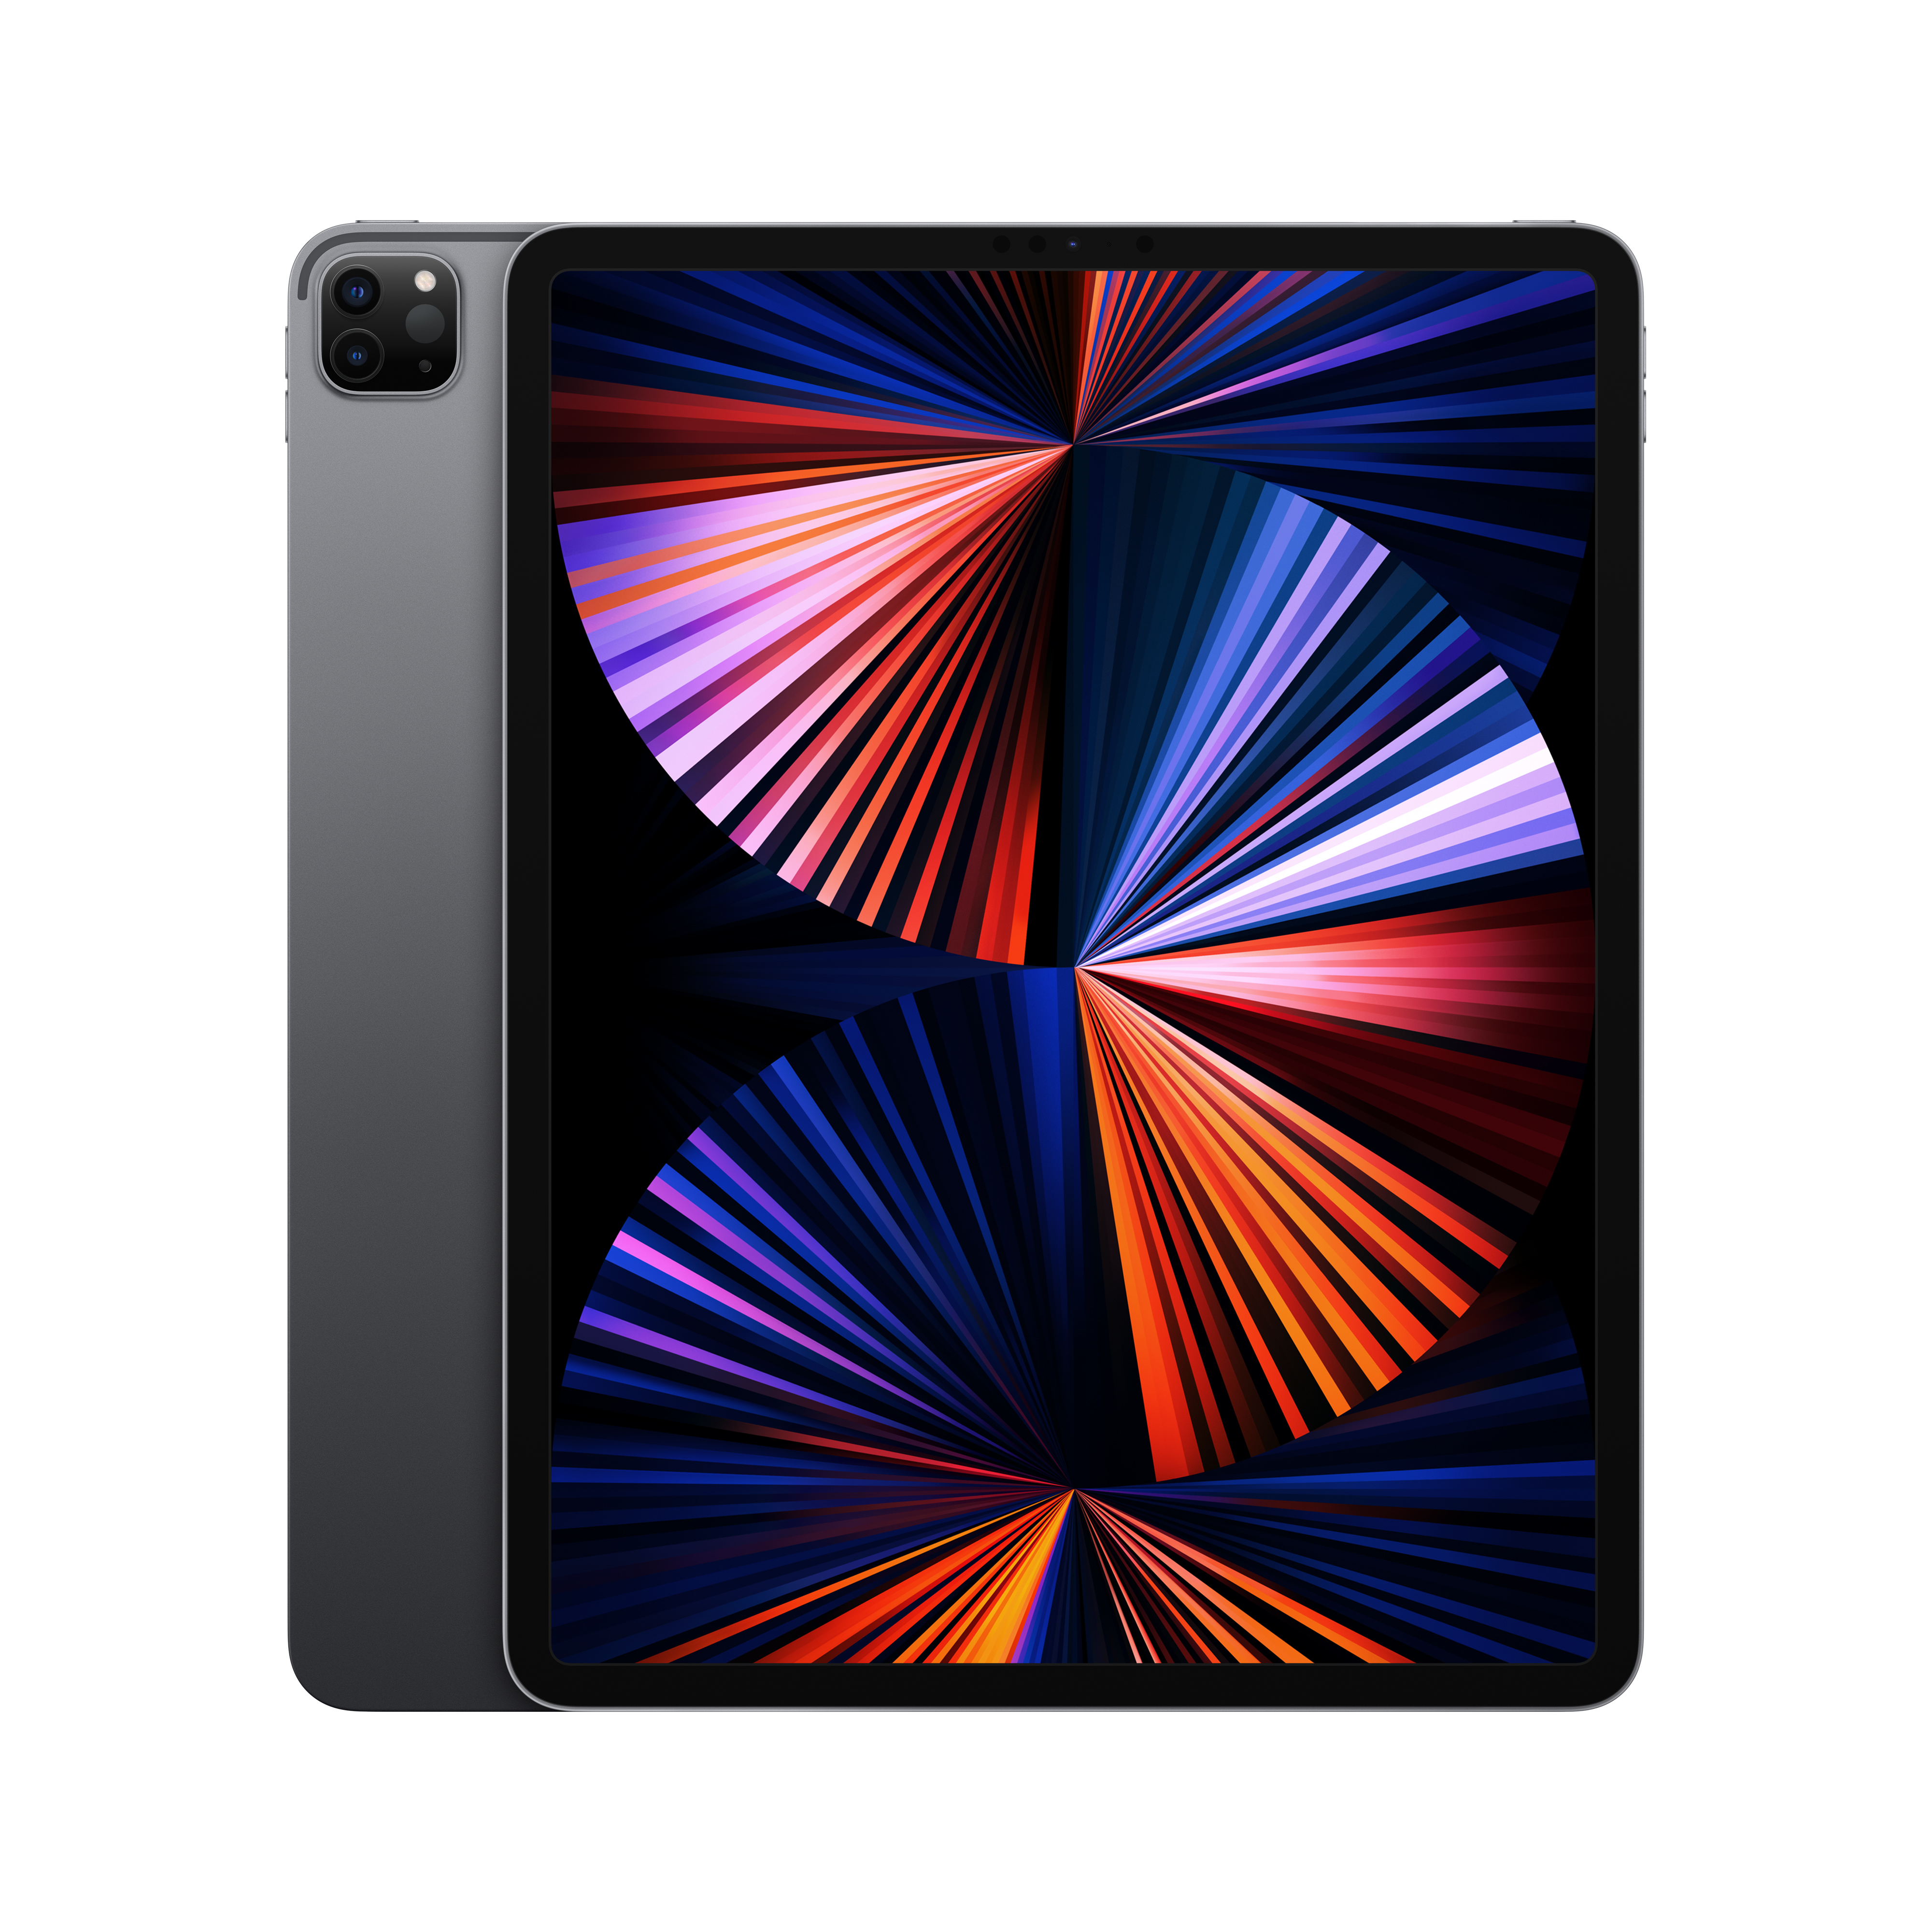 2021 Apple 12.9-inch iPad Pro Wi-Fi + Cellular 256GB - Space Gray (5th Generation) - image 1 of 9